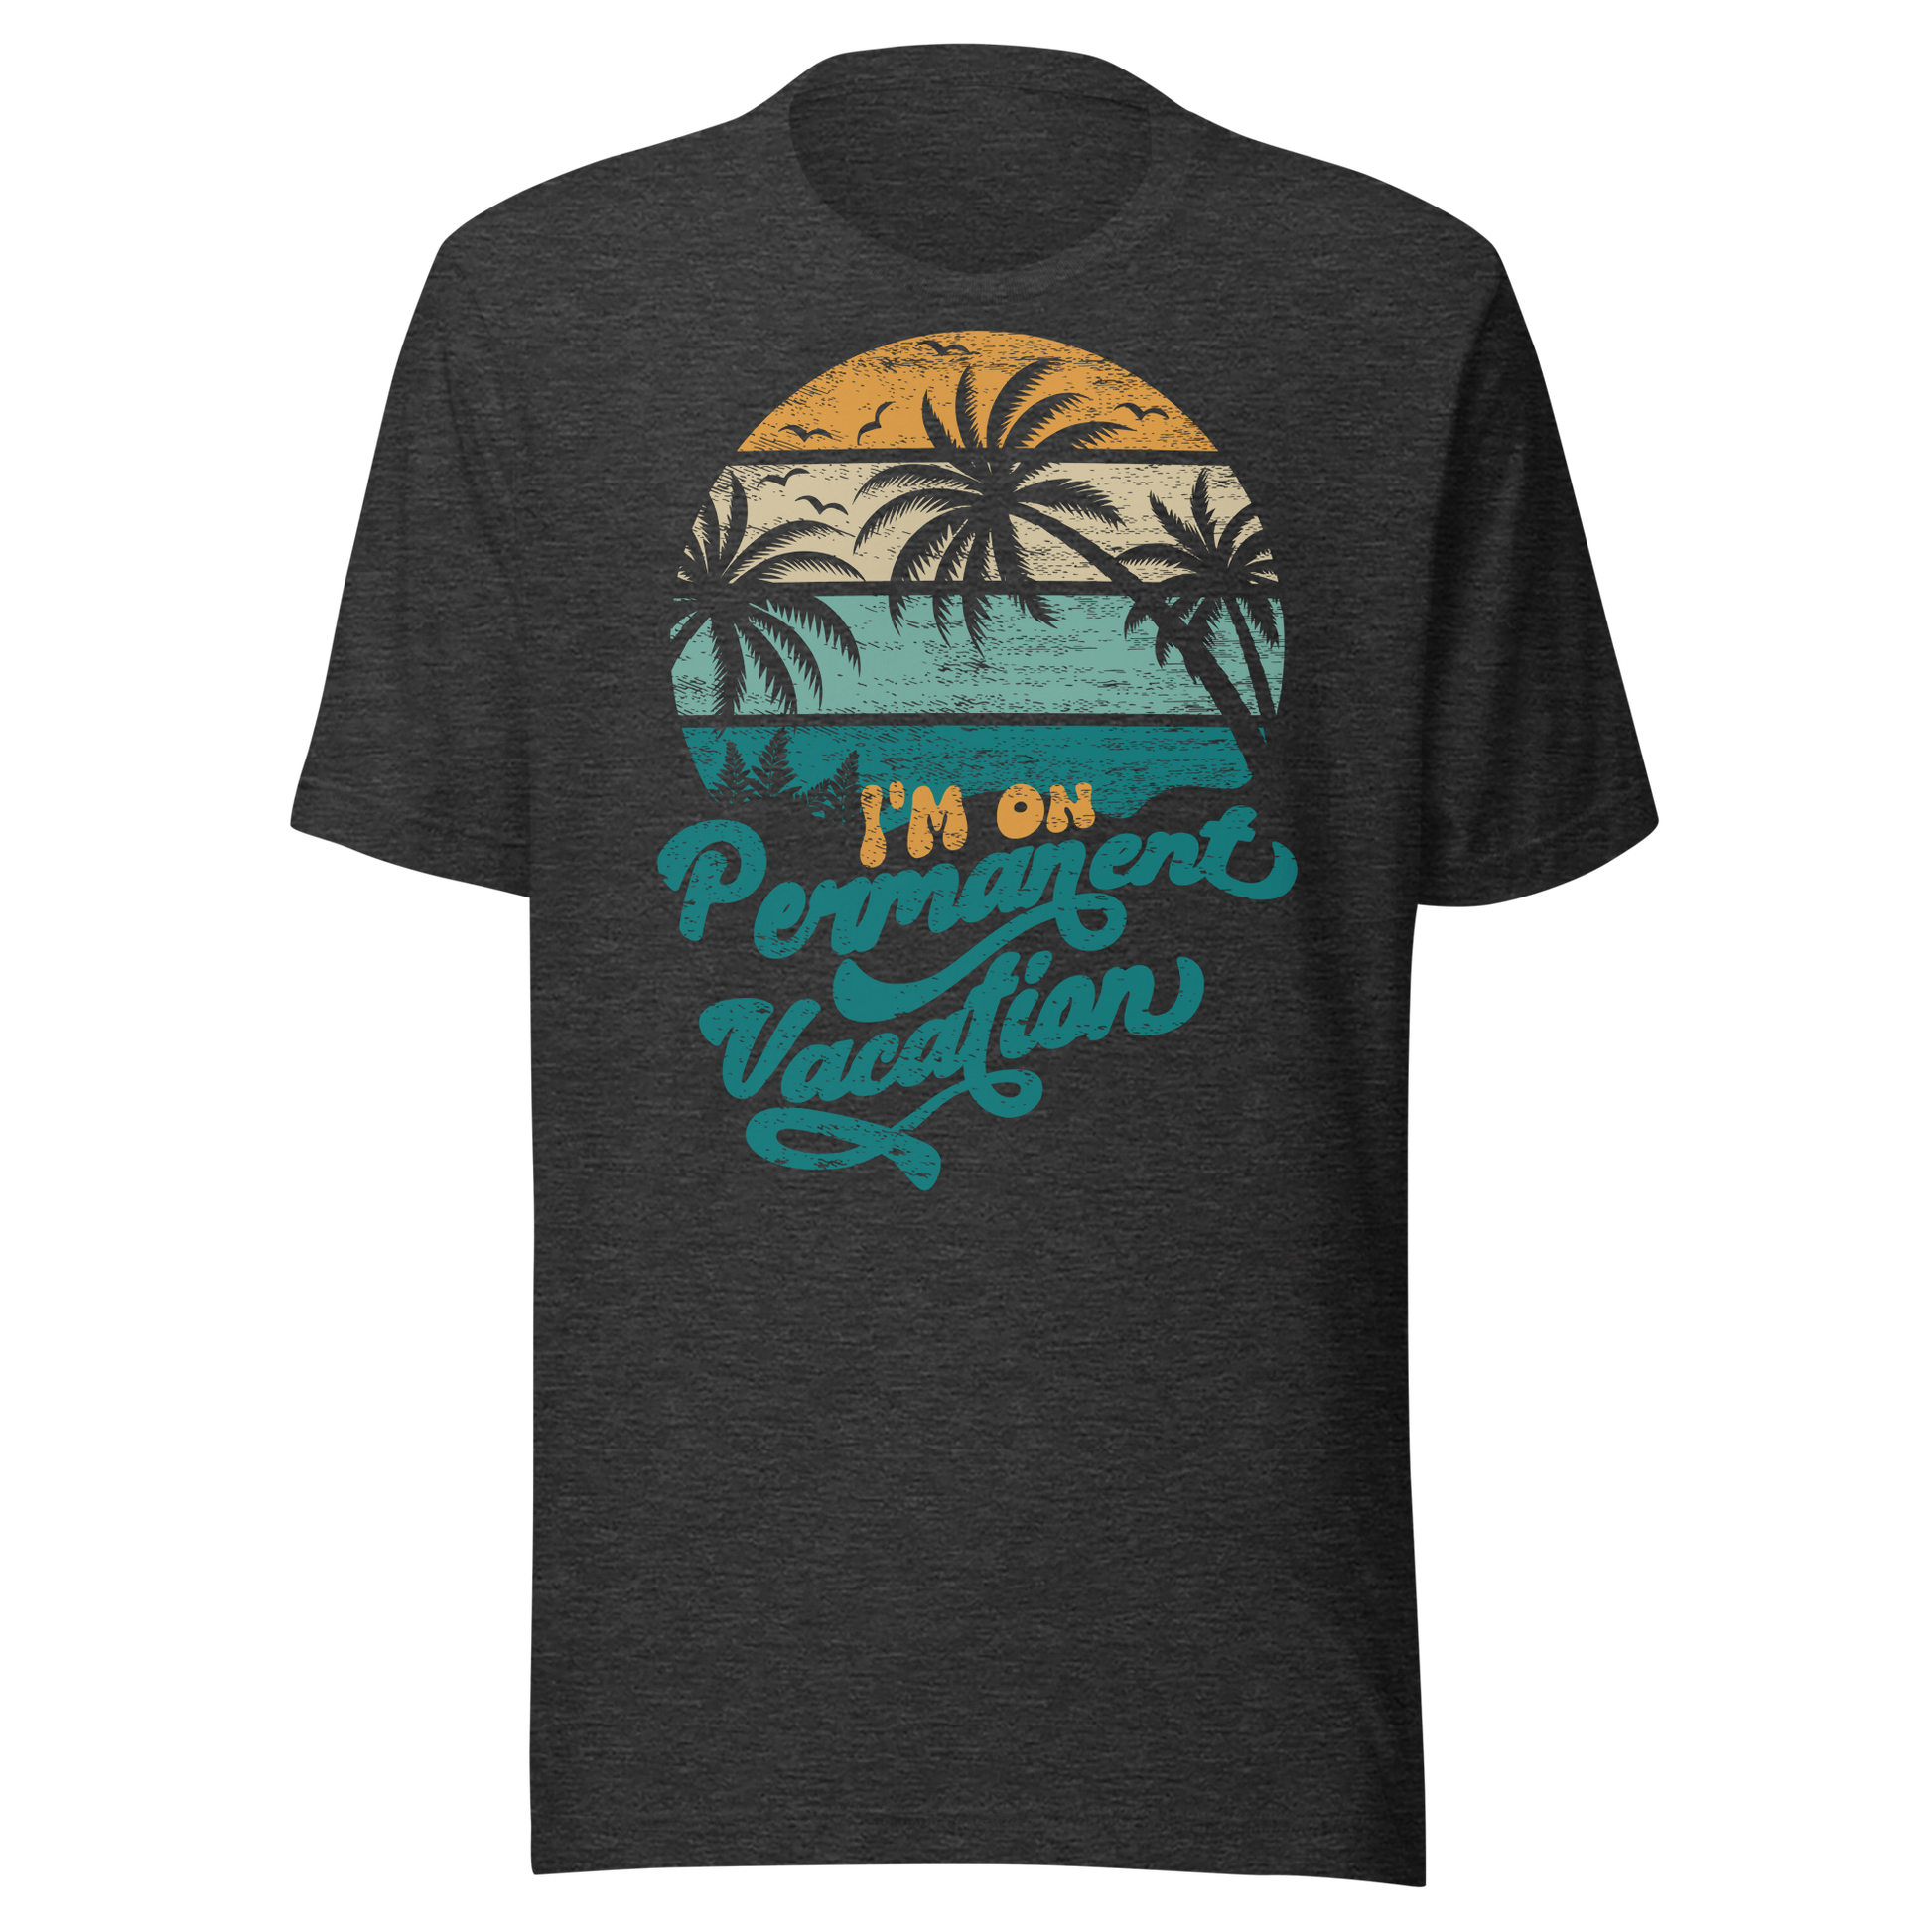 Retro Unisex T-Shirt - Palm Trees With a Retirement Quote Ghost Front